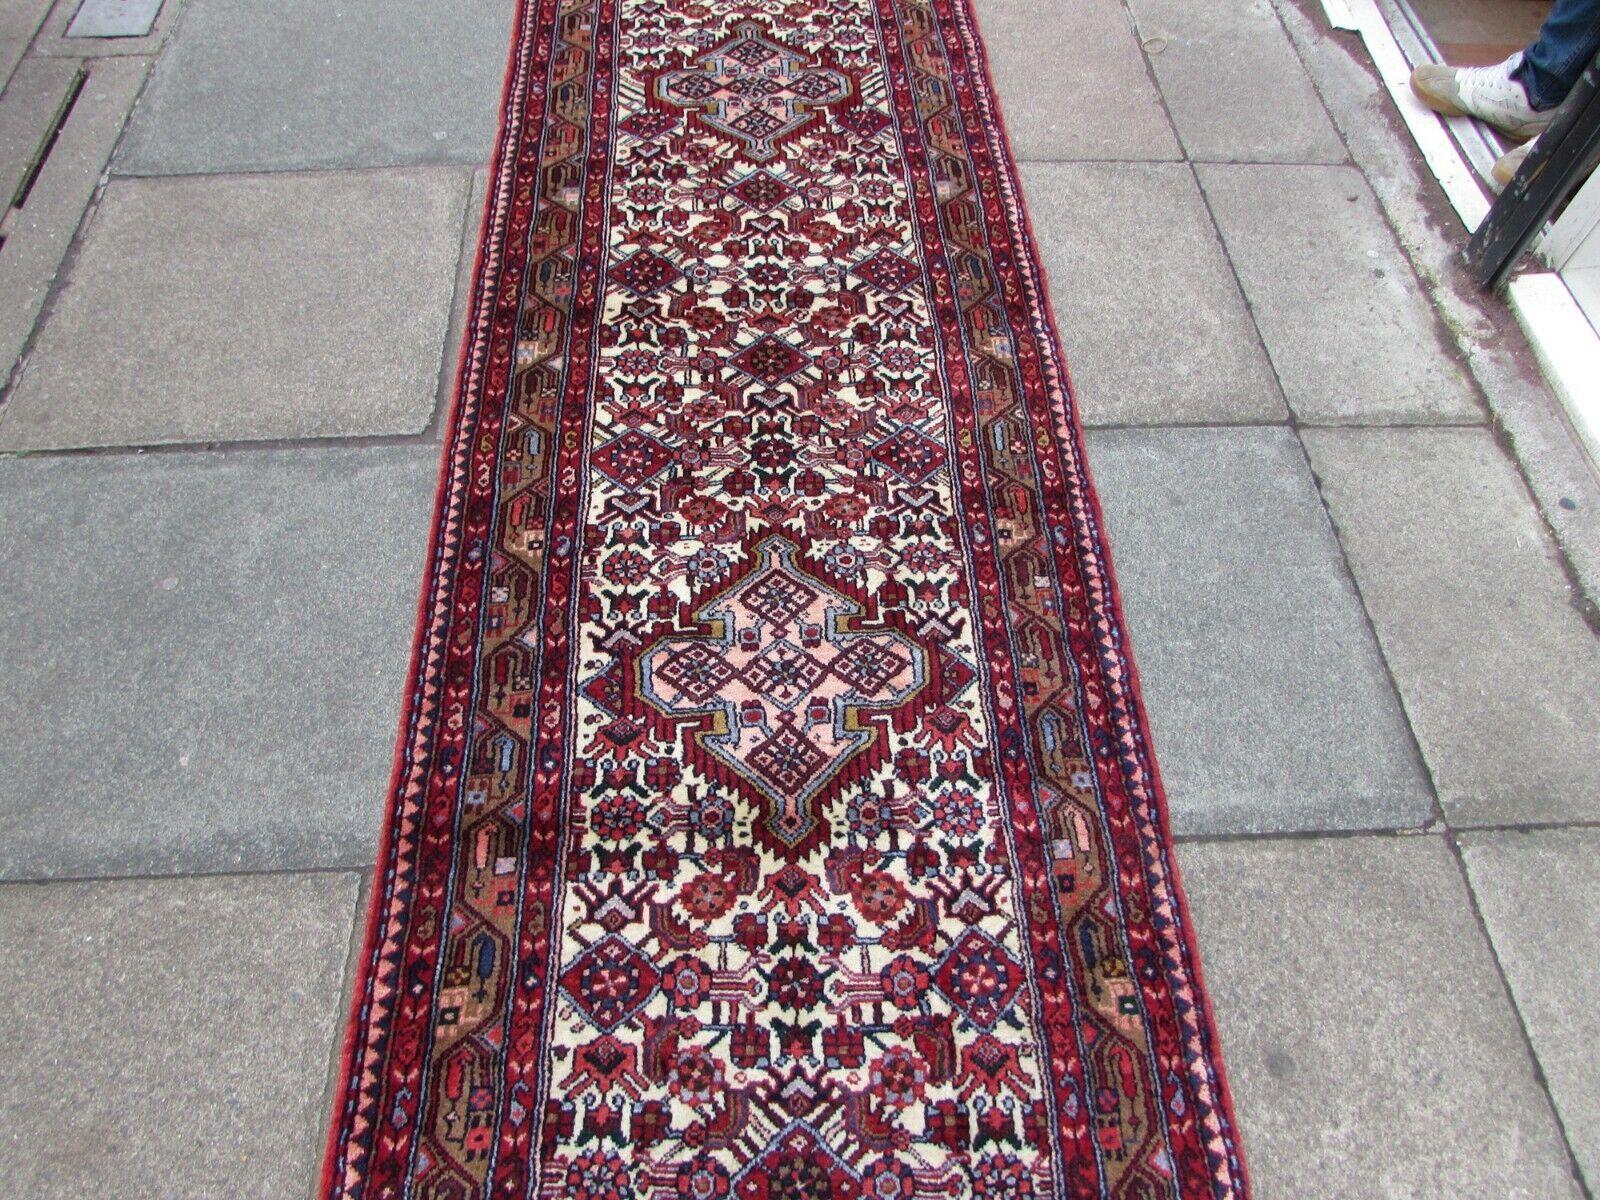 French Handmade Vintage Persian Style Hamadan Long Runner Rug 2.8' x 18.8', 1970s, 1Q47 For Sale